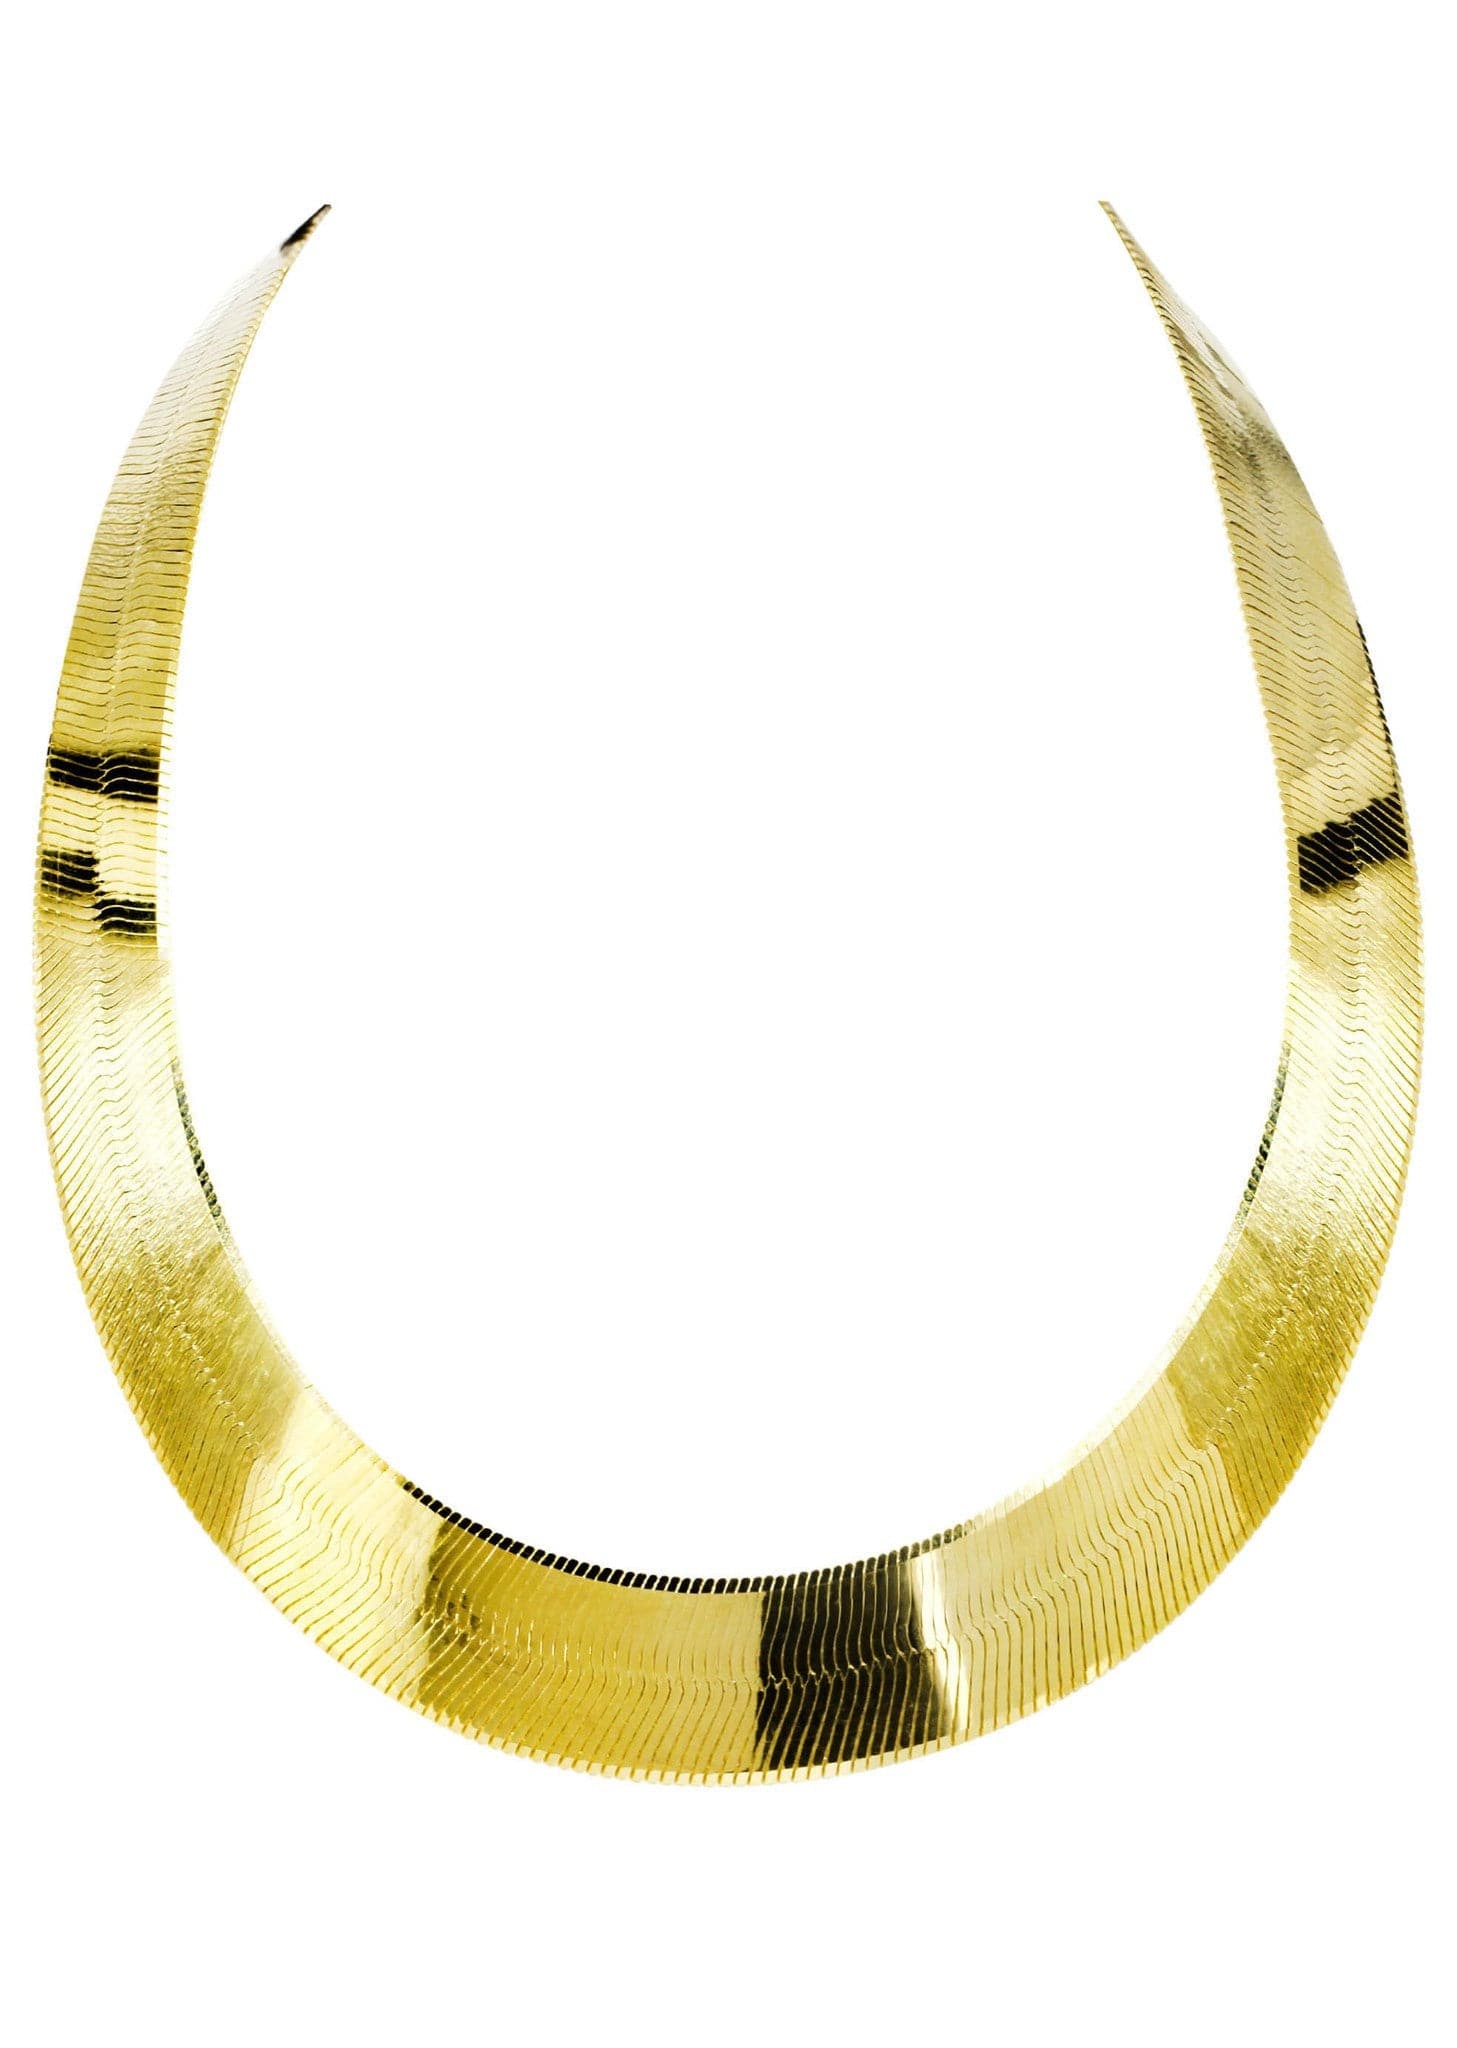 14K Gold Solid Herringbone Chain Necklace - JCPenney